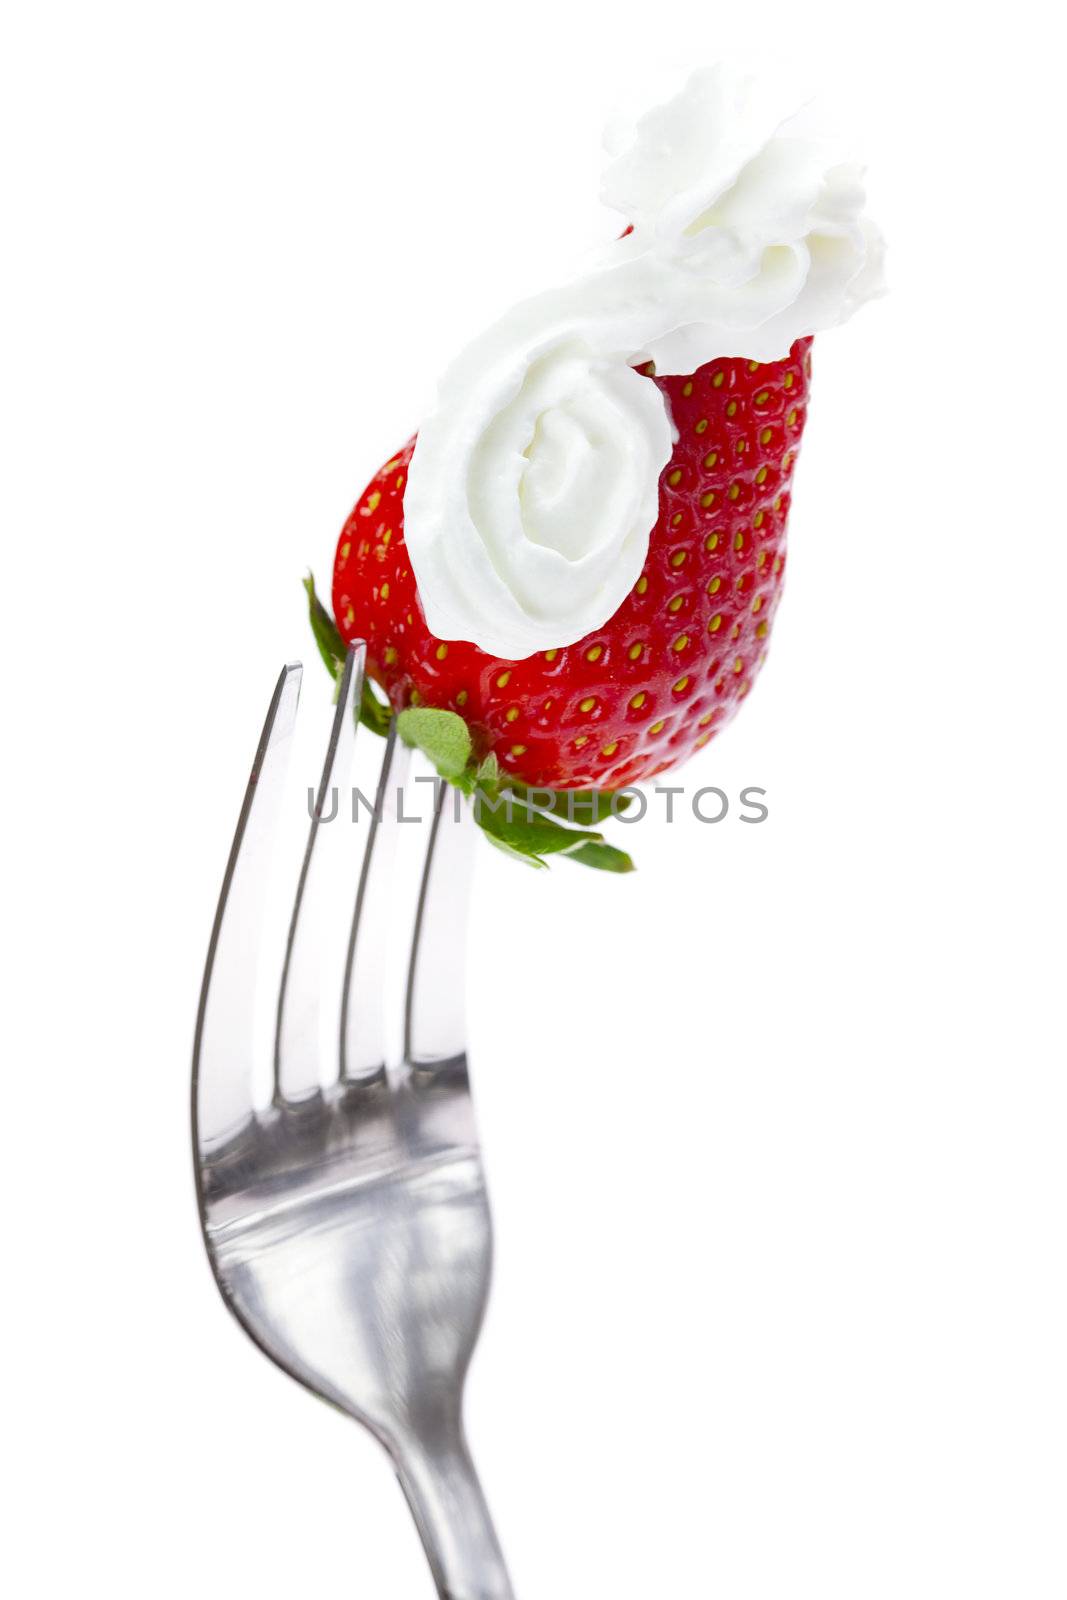 strawberries with cream on a fork isolated on white by jannyjus